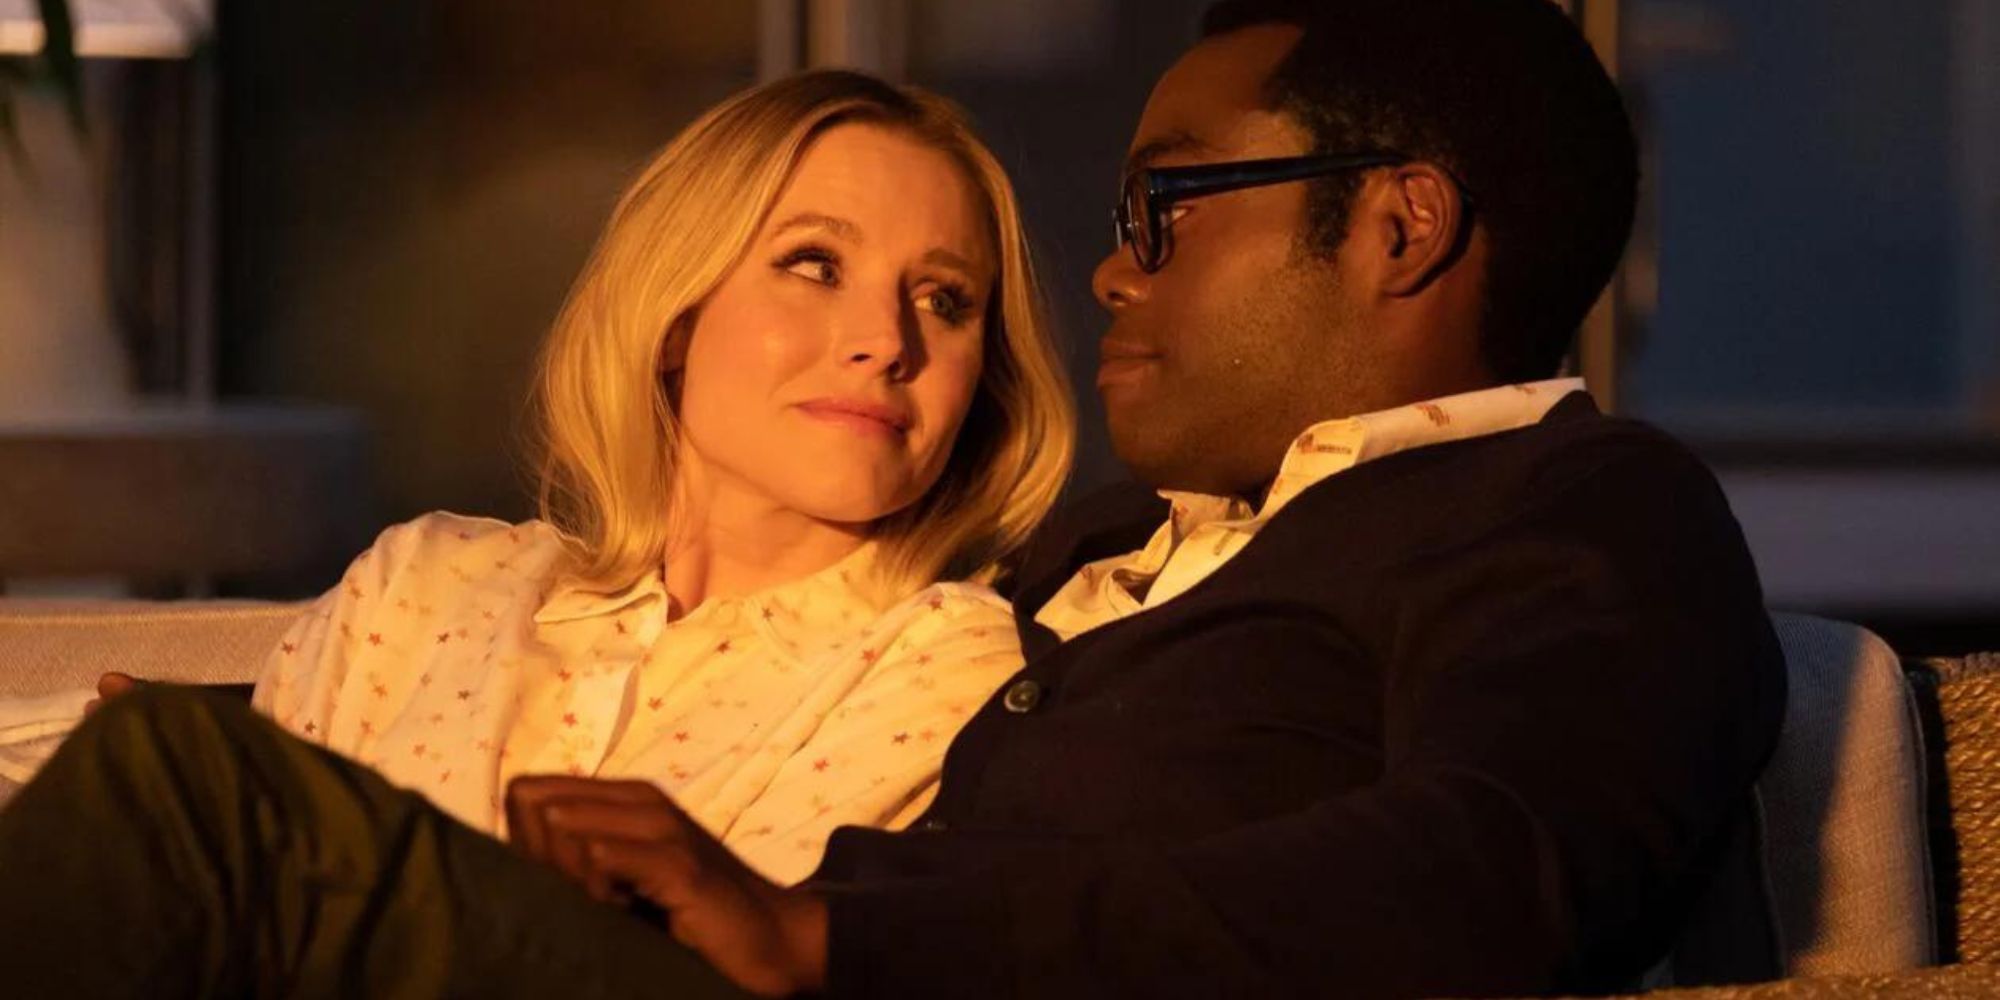 Chidi and Eleanor from The Good Place sitting on a couch together